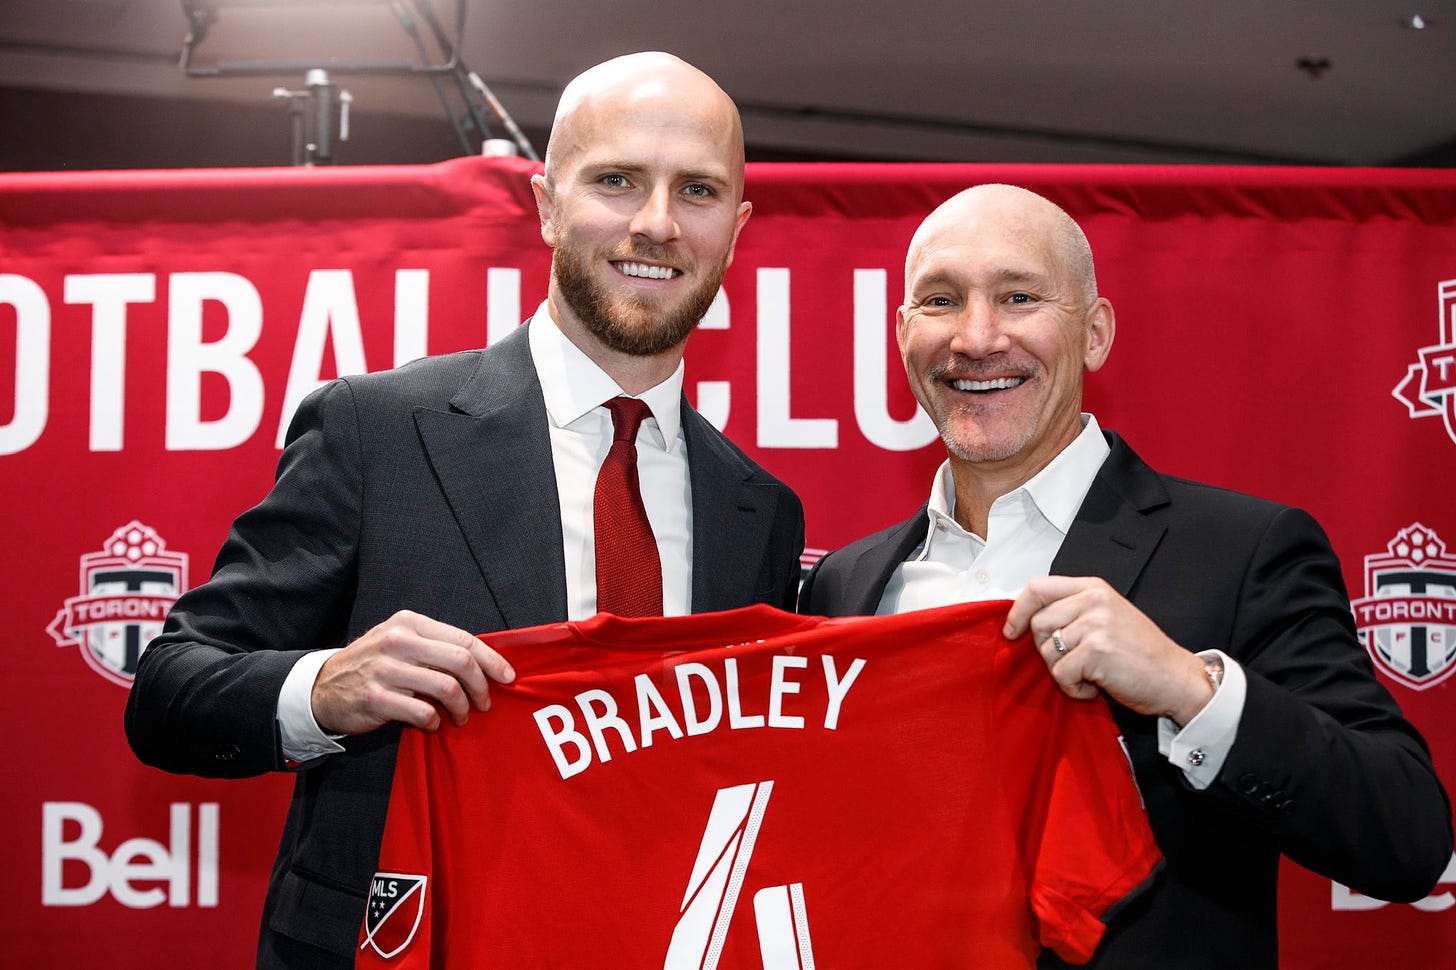 Michael Bradley vows "best years are ahead" as he re-signs with Toronto FC  | MLSSoccer.com